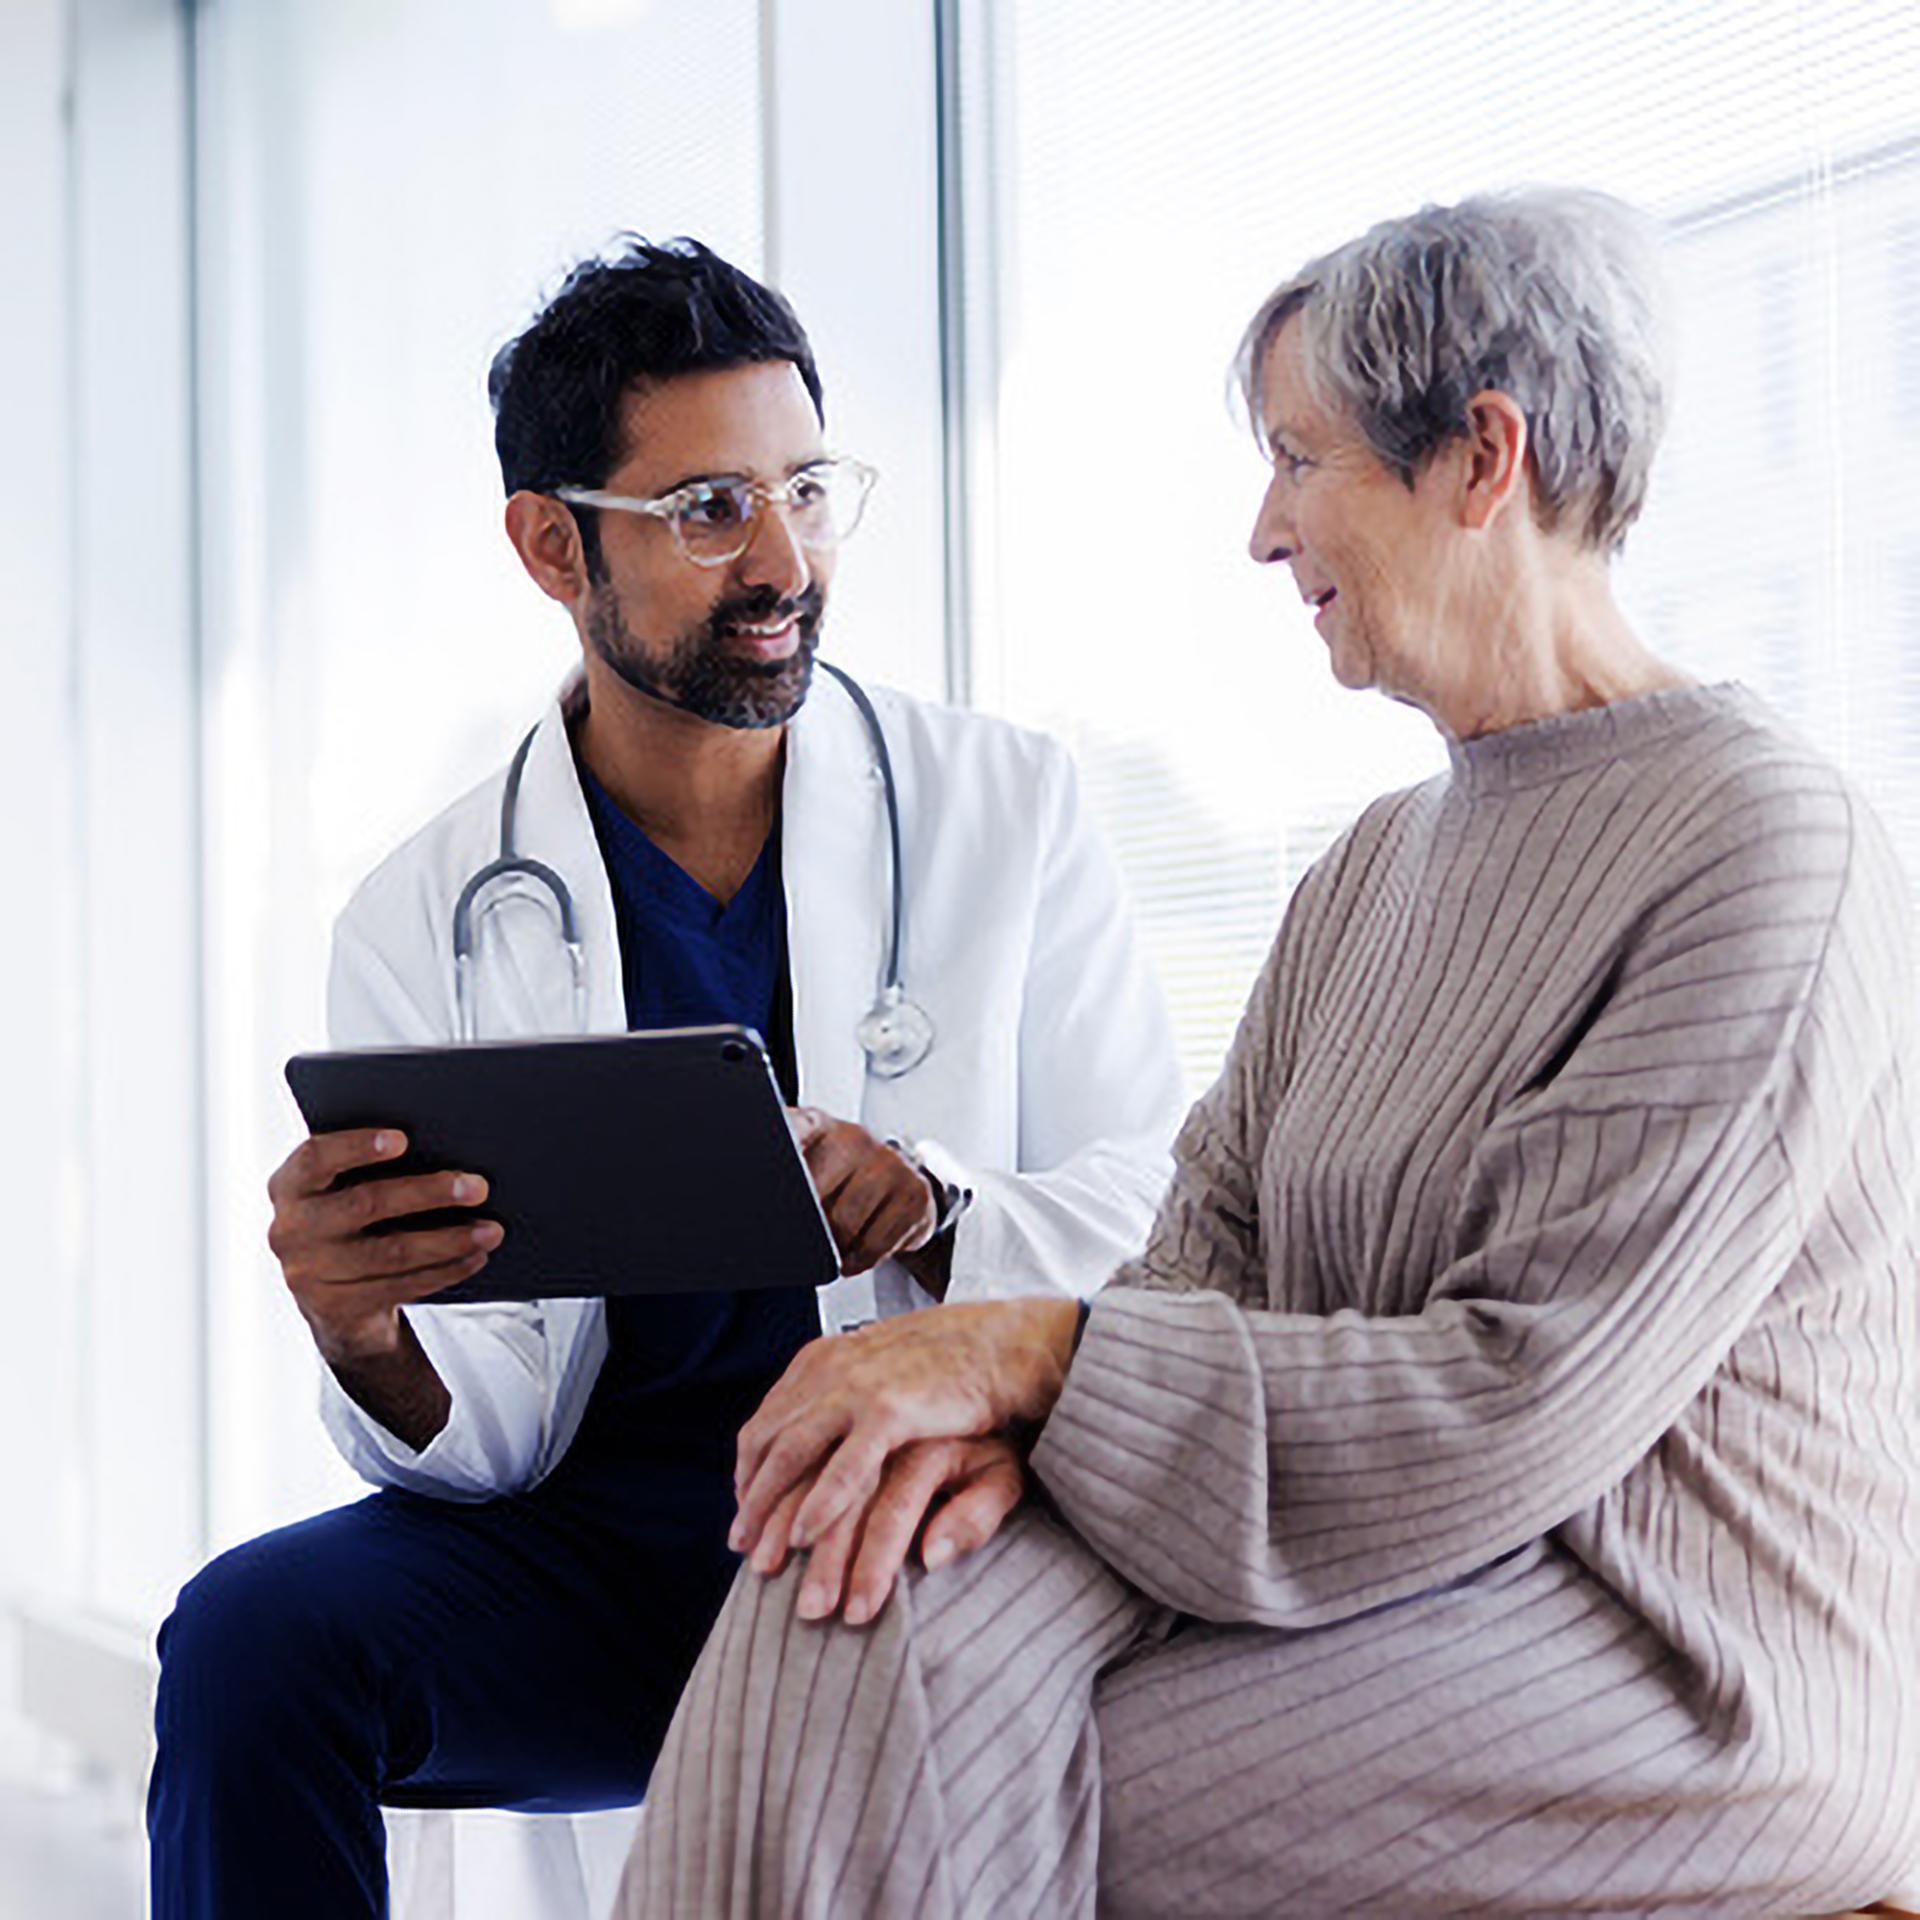 A doctor holding a tablet discussing something with an elderly patient